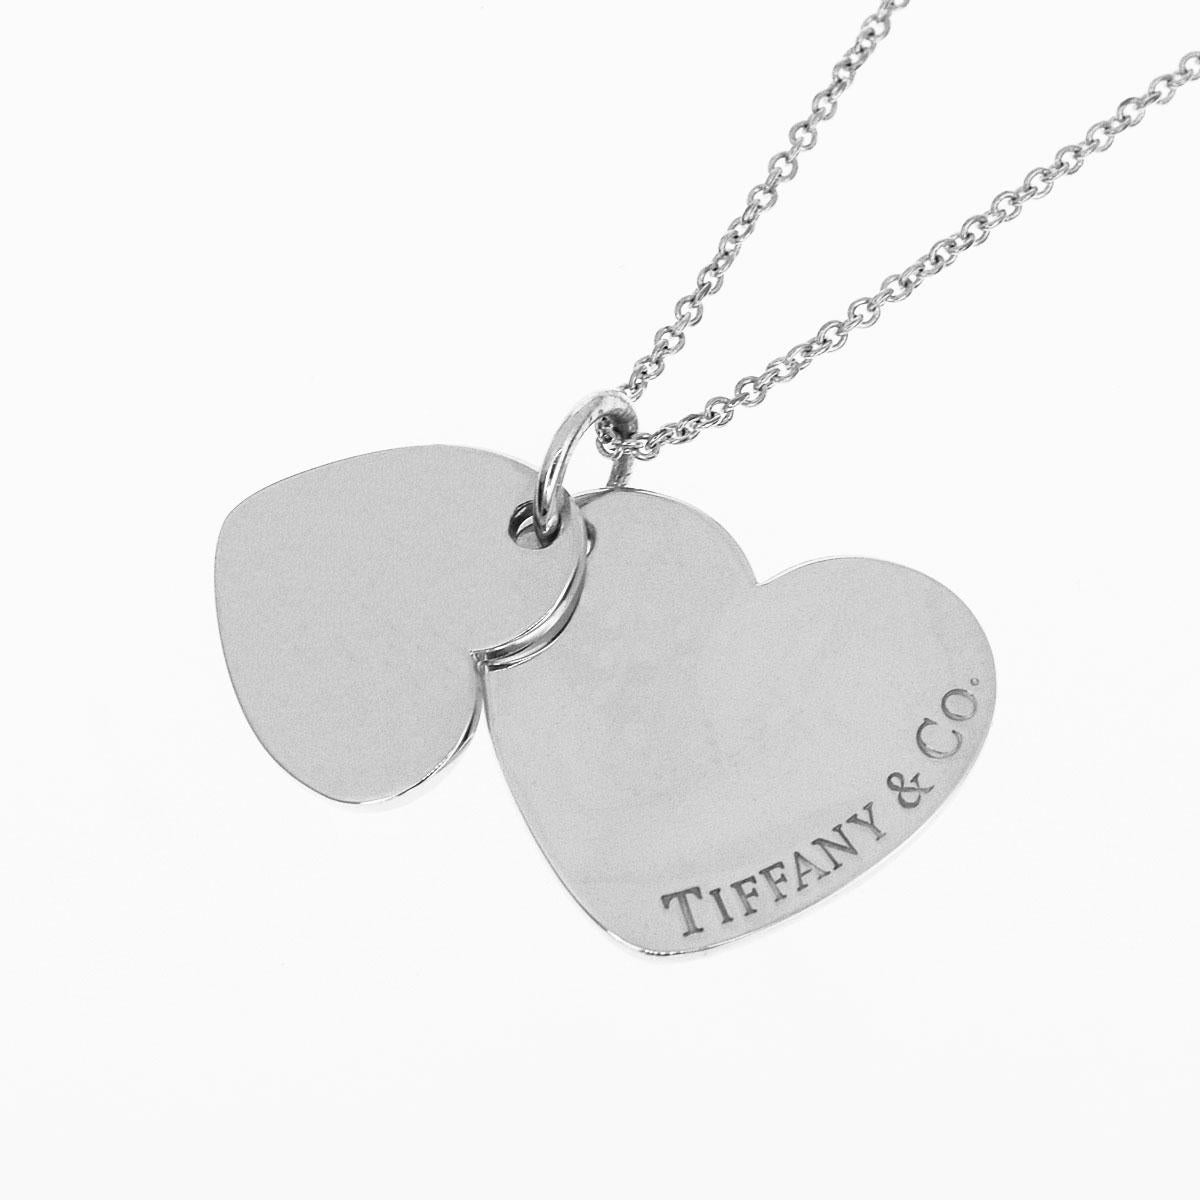 Tiffany & Co. Sterling Silver Double Heart Tag Pendant Necklace 2